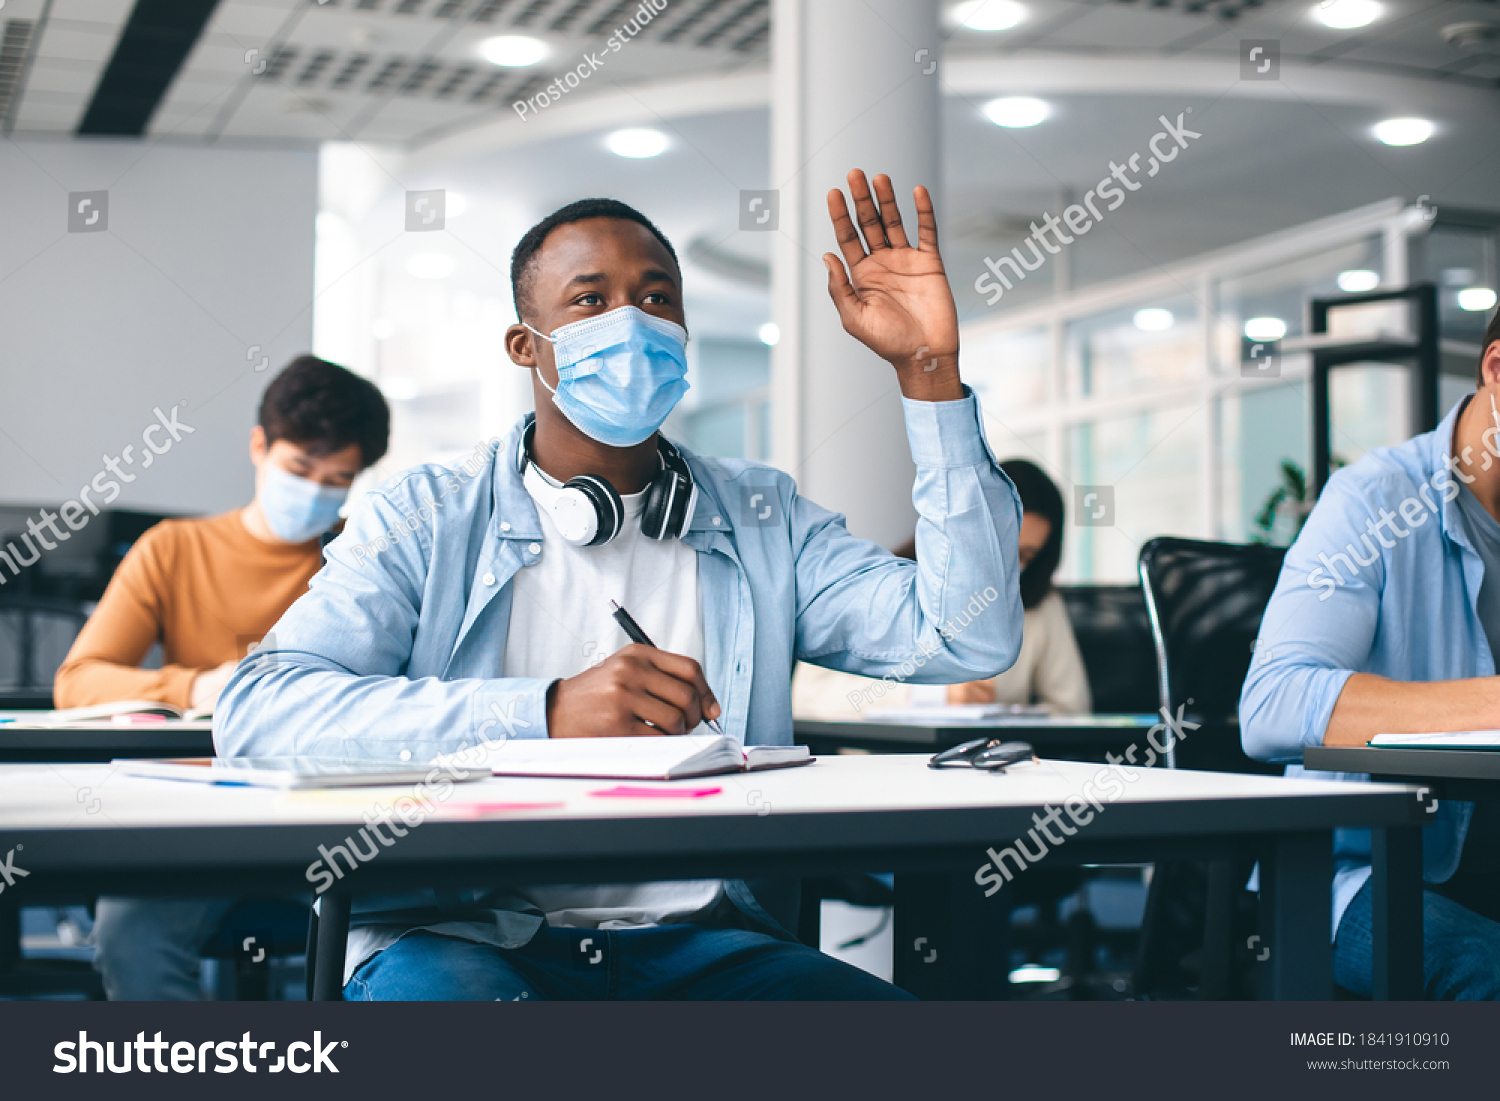 Education, Pandemic And Health Concept. African american male student raising hand for answer, wearing protective medical mask for protection from virus disease at high school lesson. New Normal #1841910910